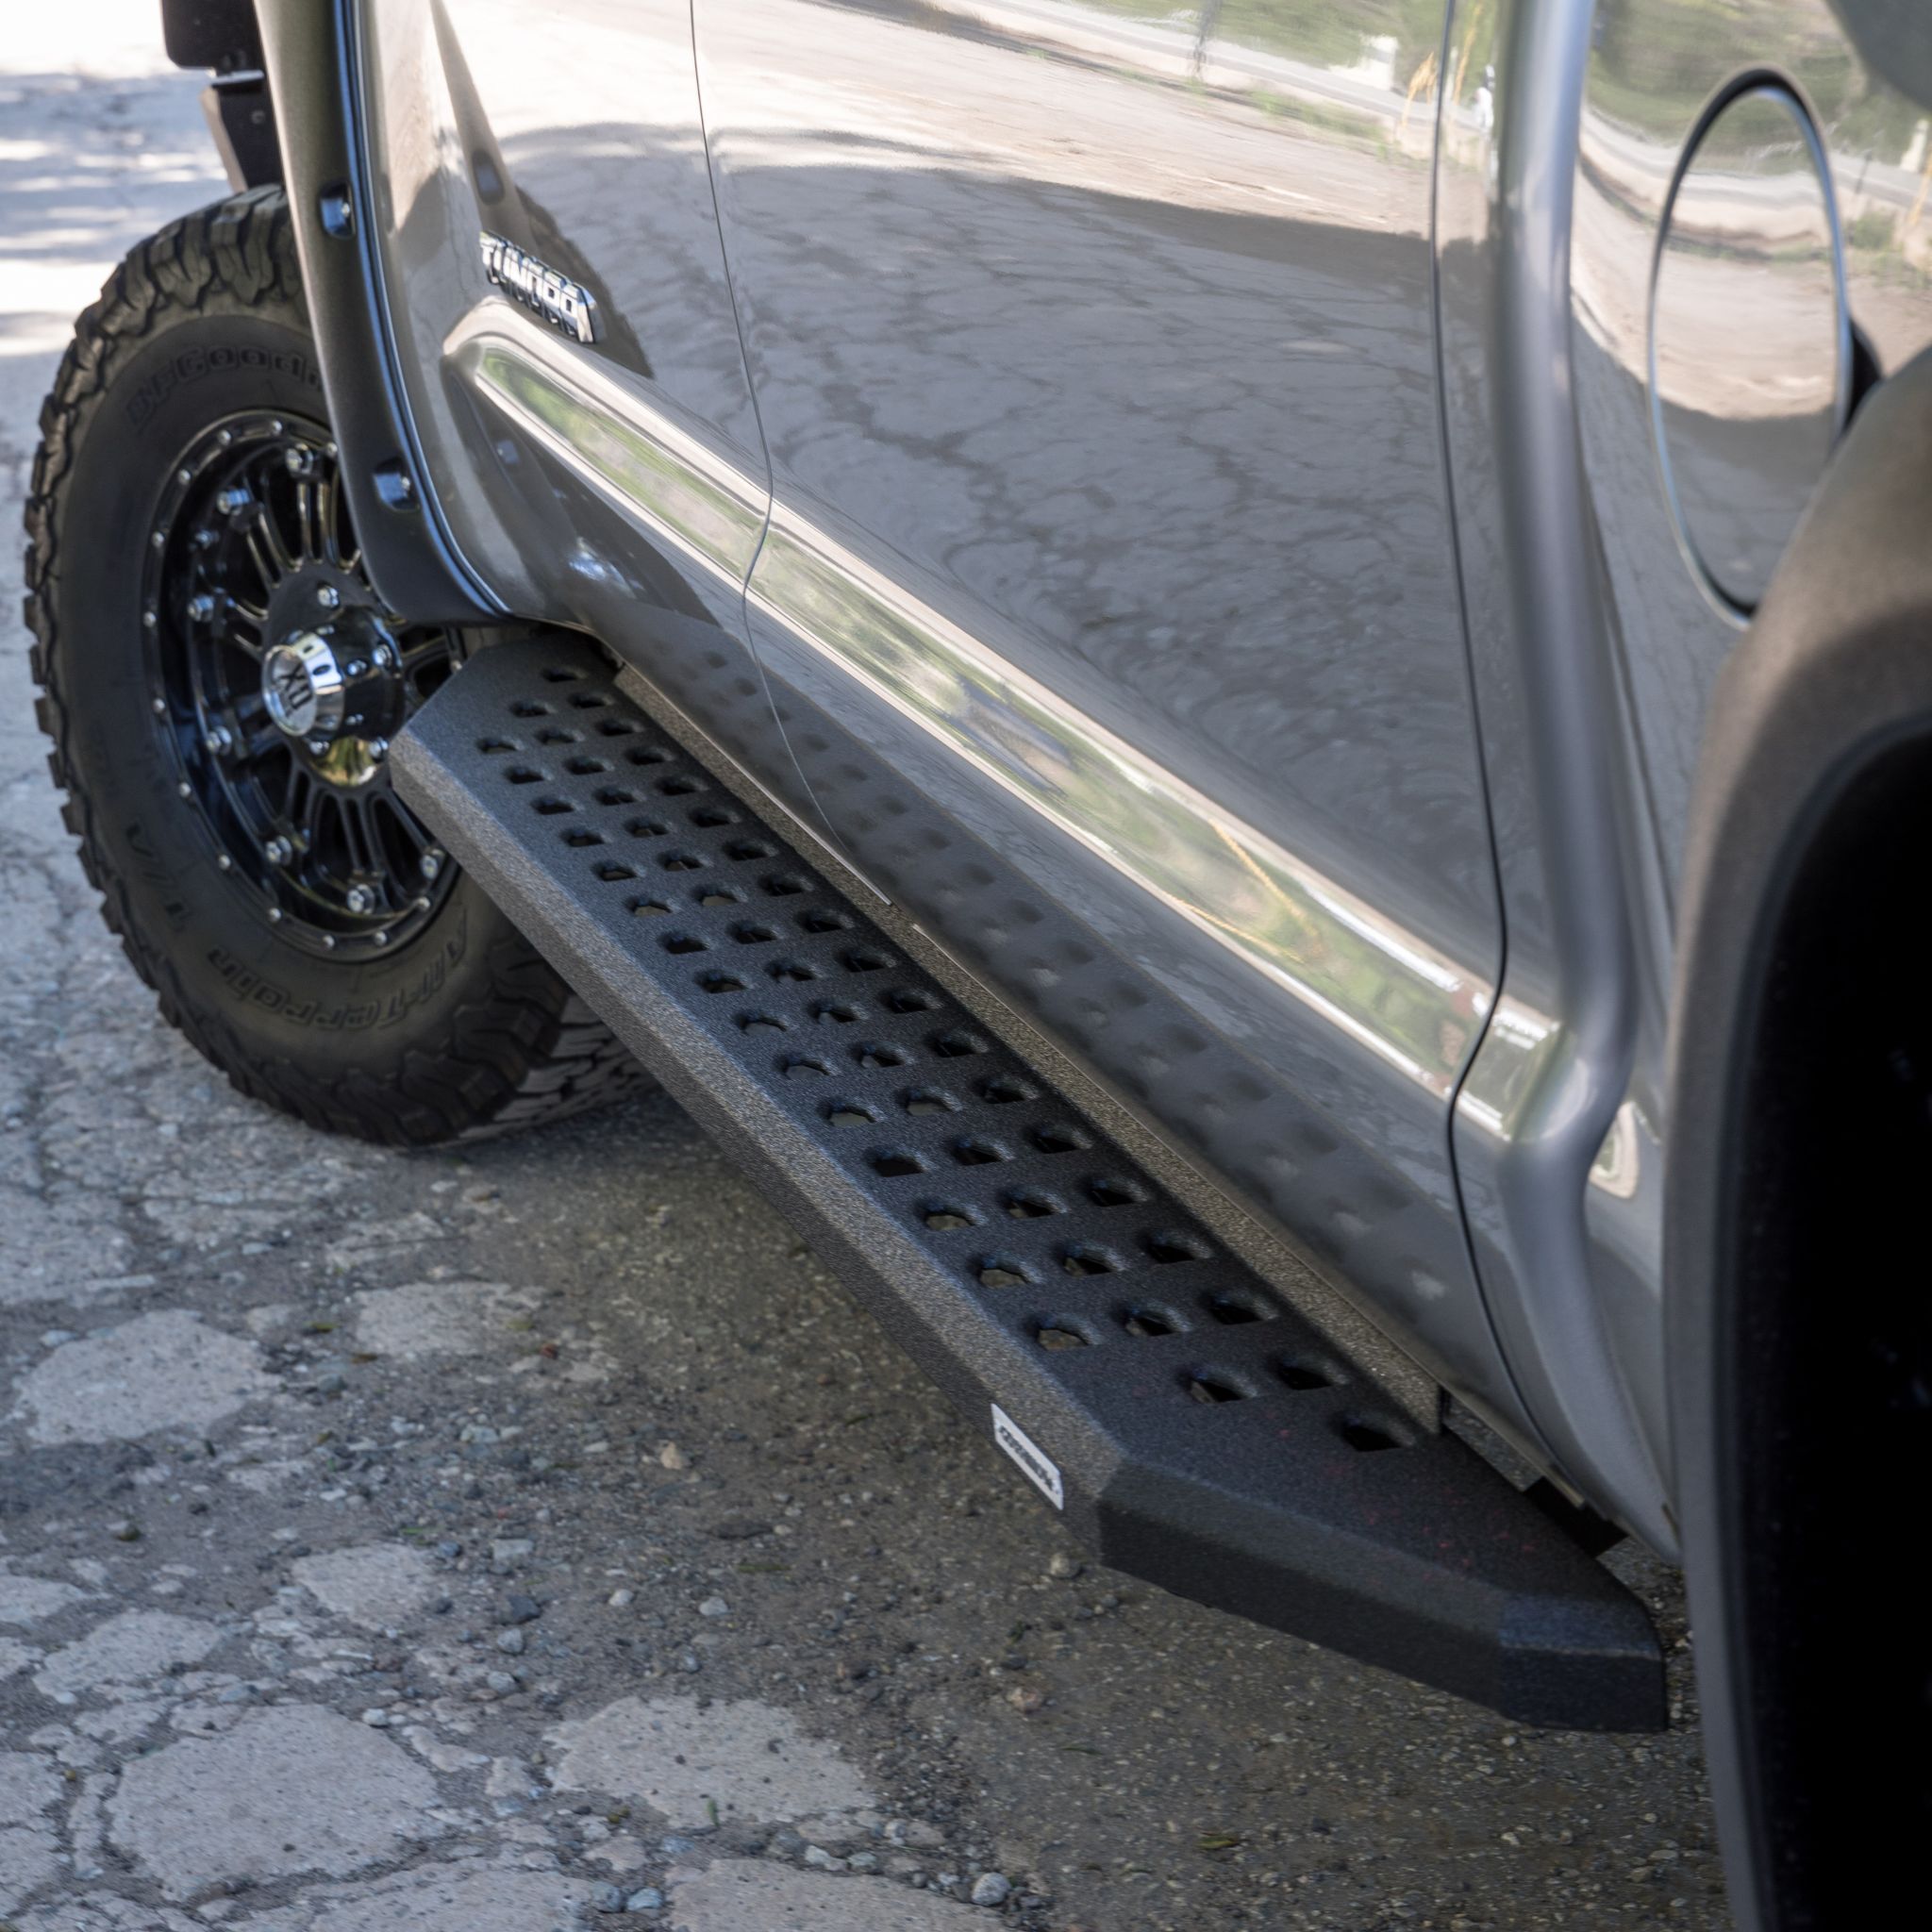 Go Rhino - 69417780T - RB20 Running Boards With Mounting Brackets - Protective Bedliner Coating